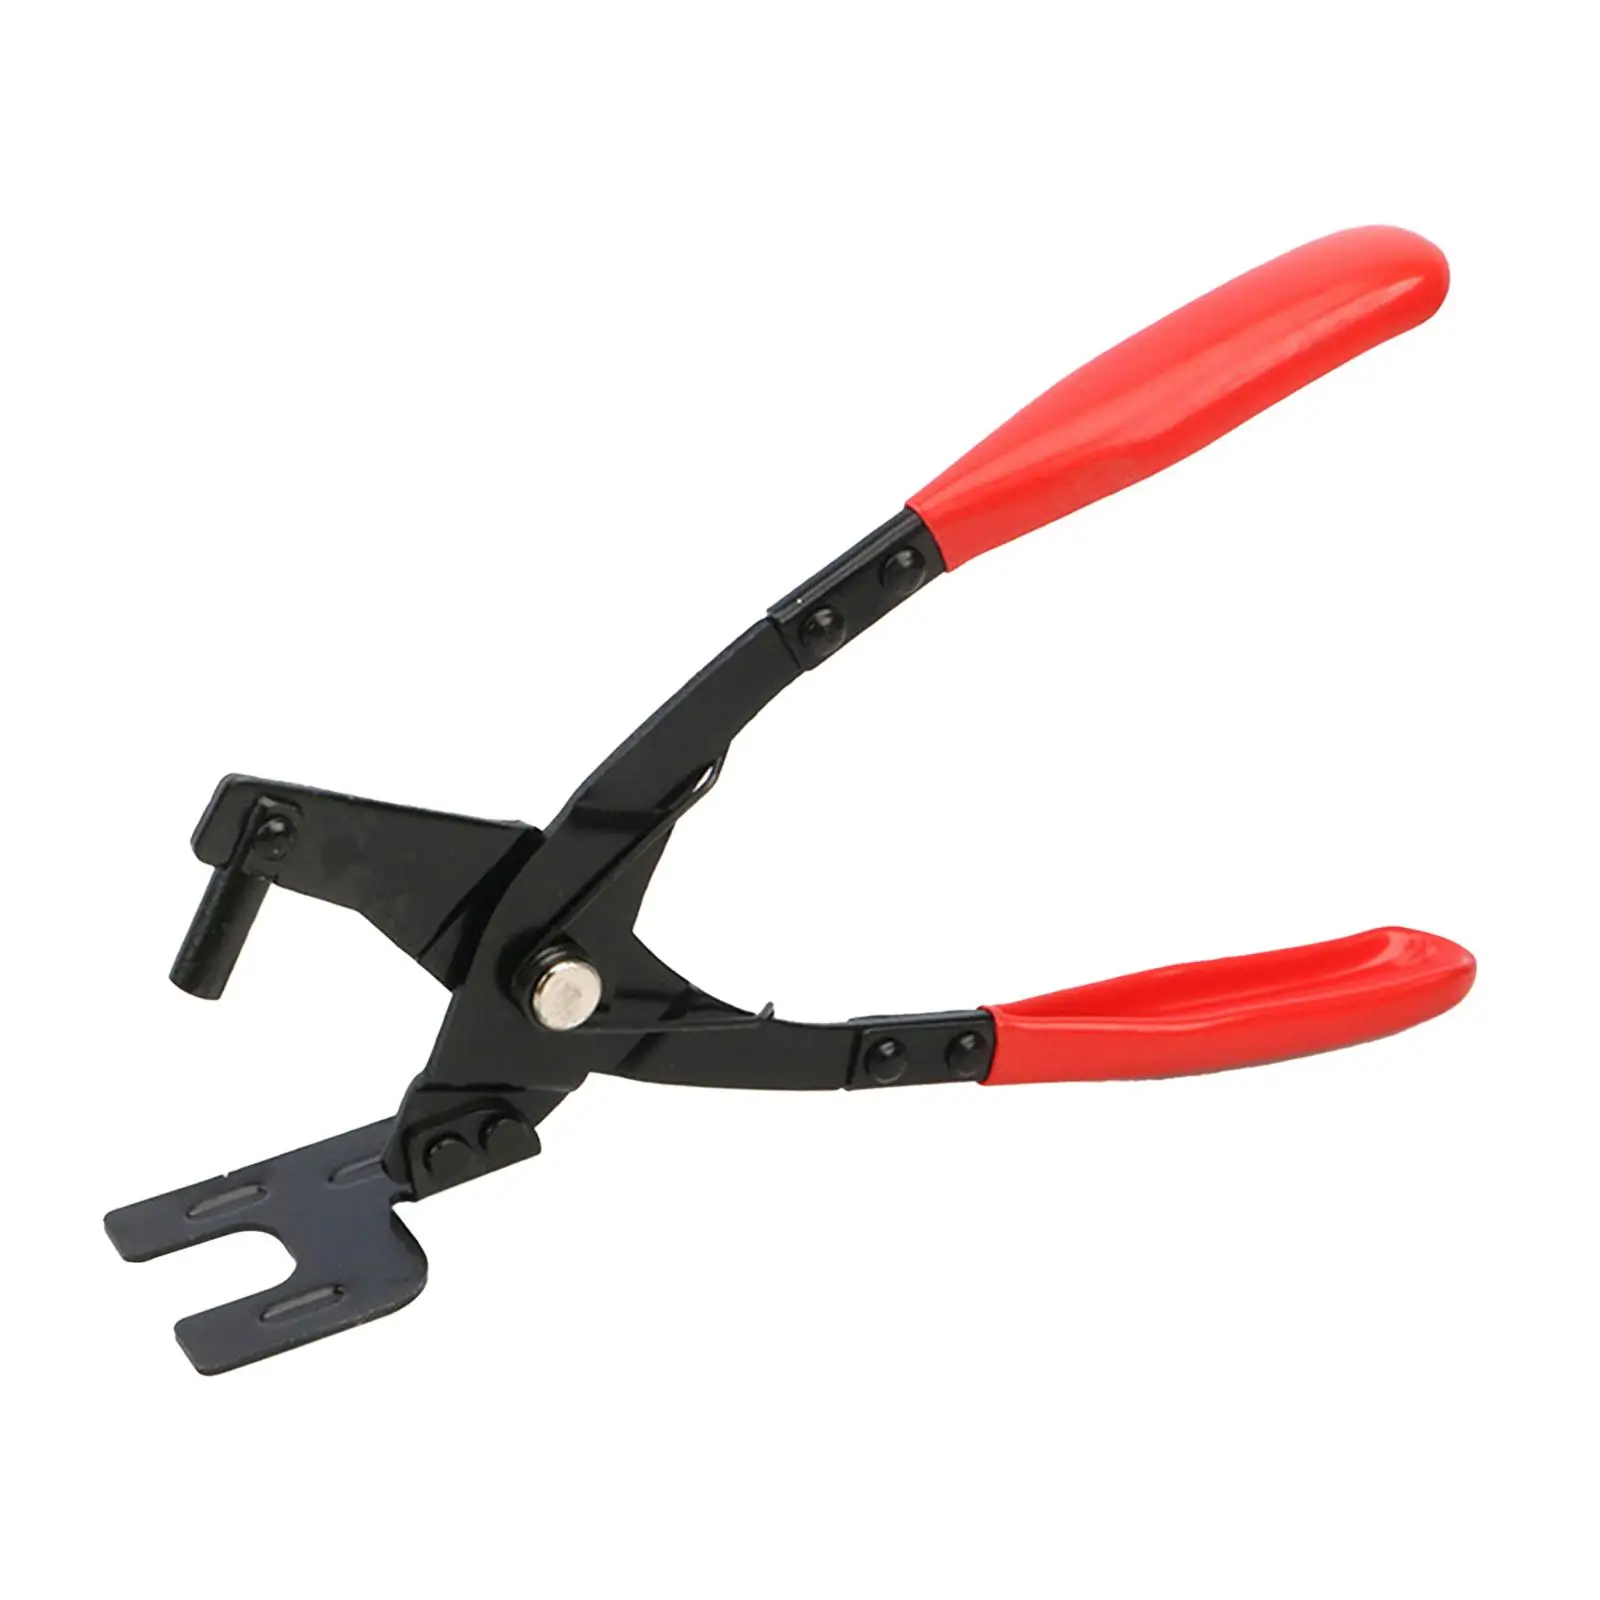 Exhaust Hanger Removal Pliers, 25 Degree Offset Handles, Exhaust Hanger Removal